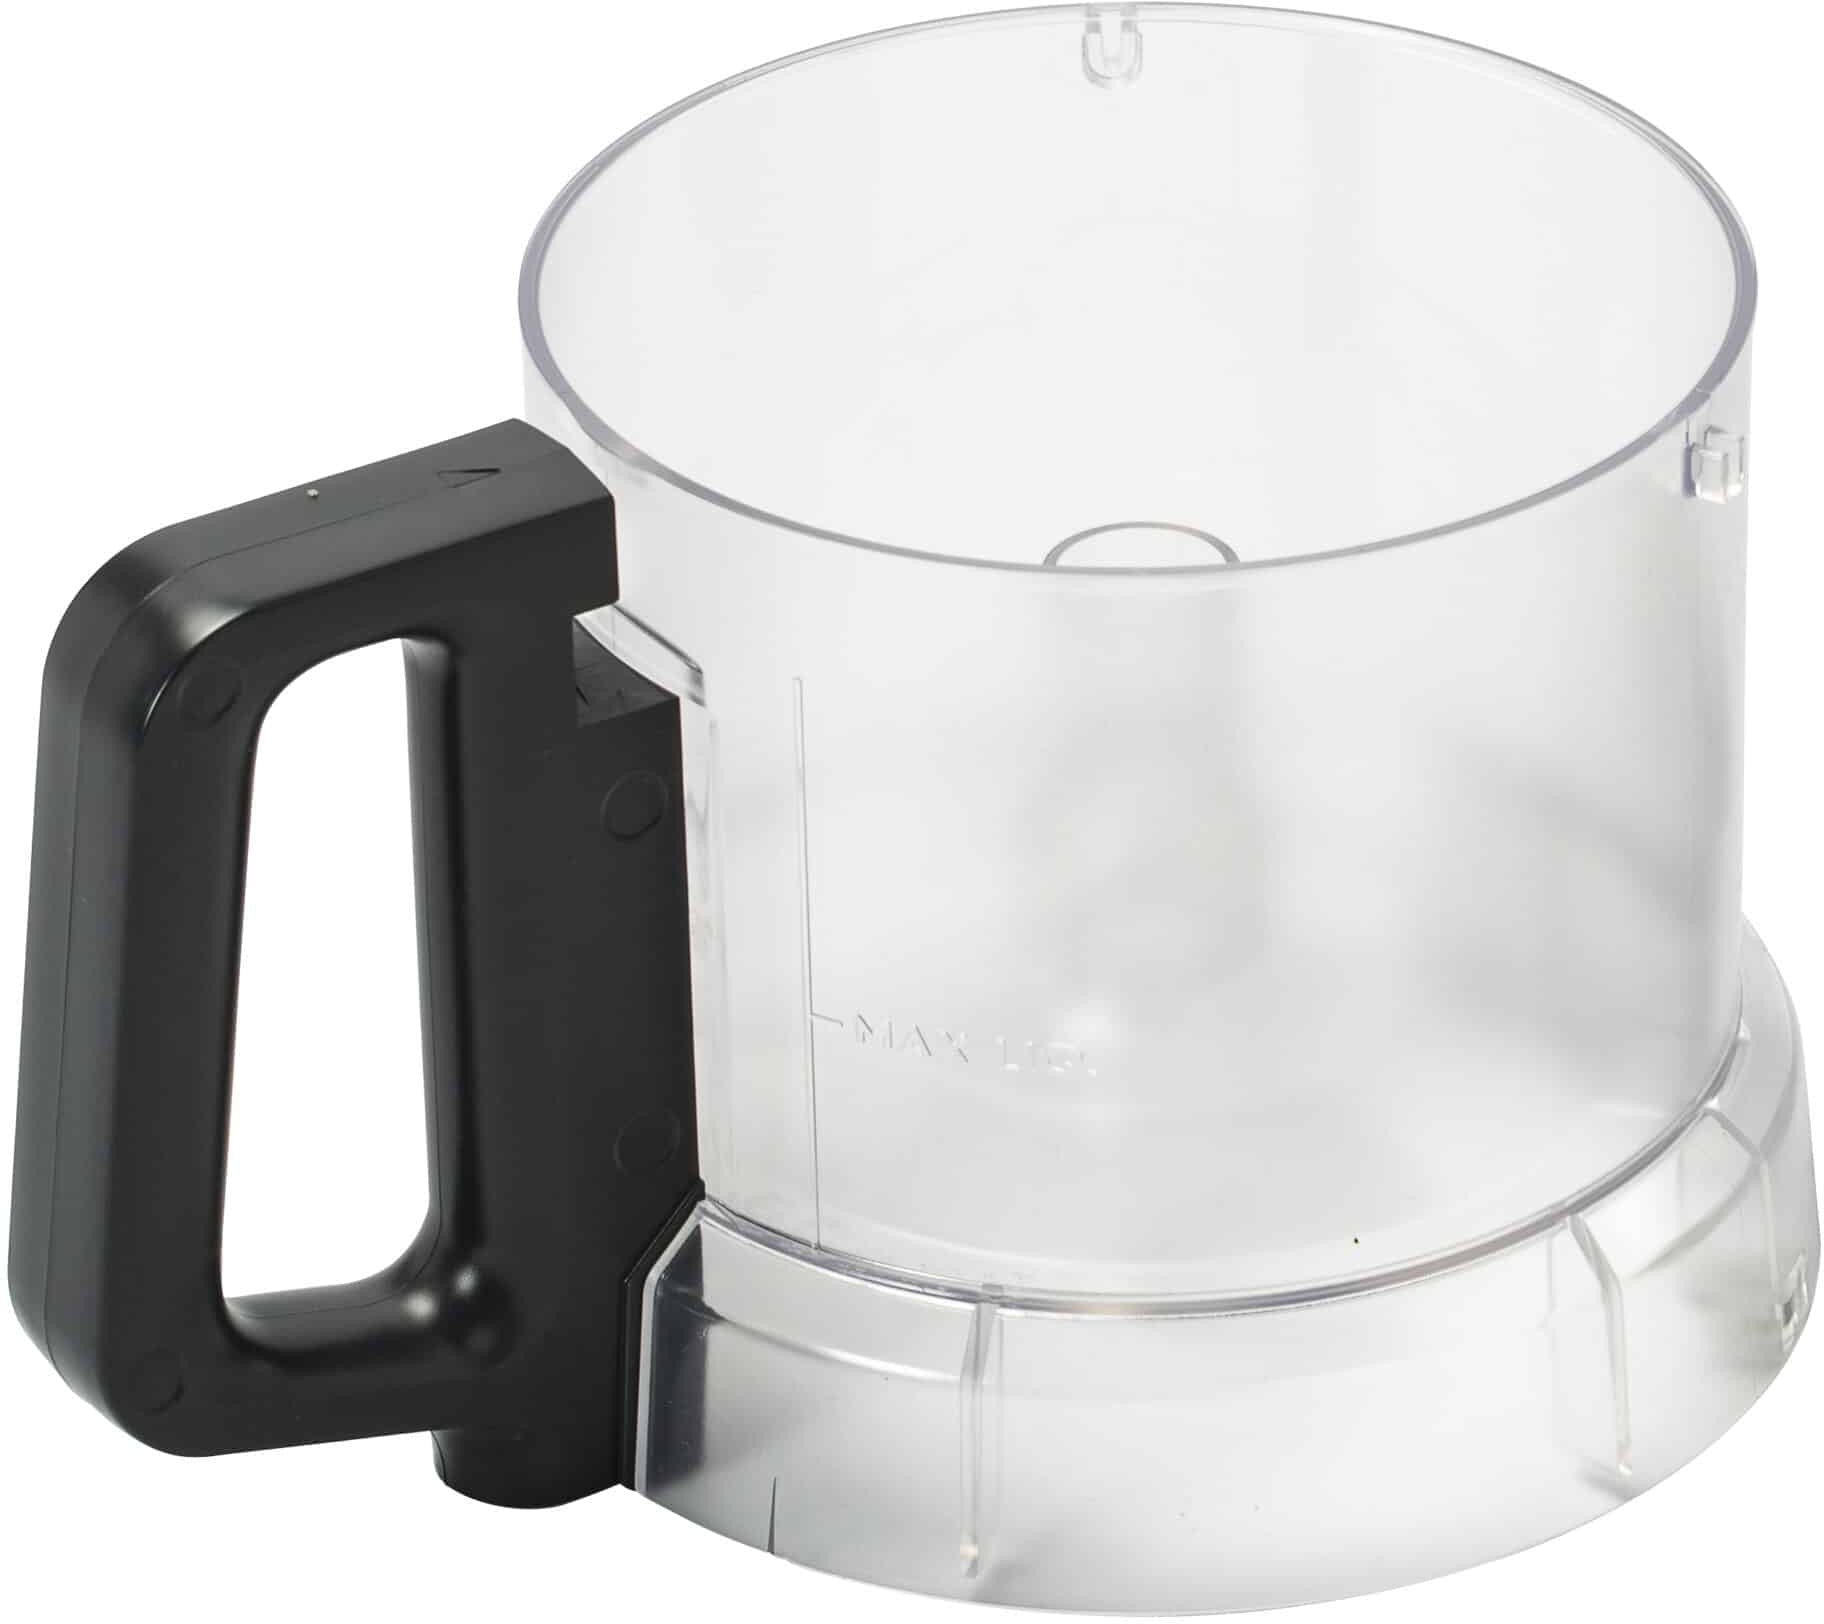 DITO SAMA - Transparent Copolyester Bowl for 2.6 L Cutter Mixer - 650229